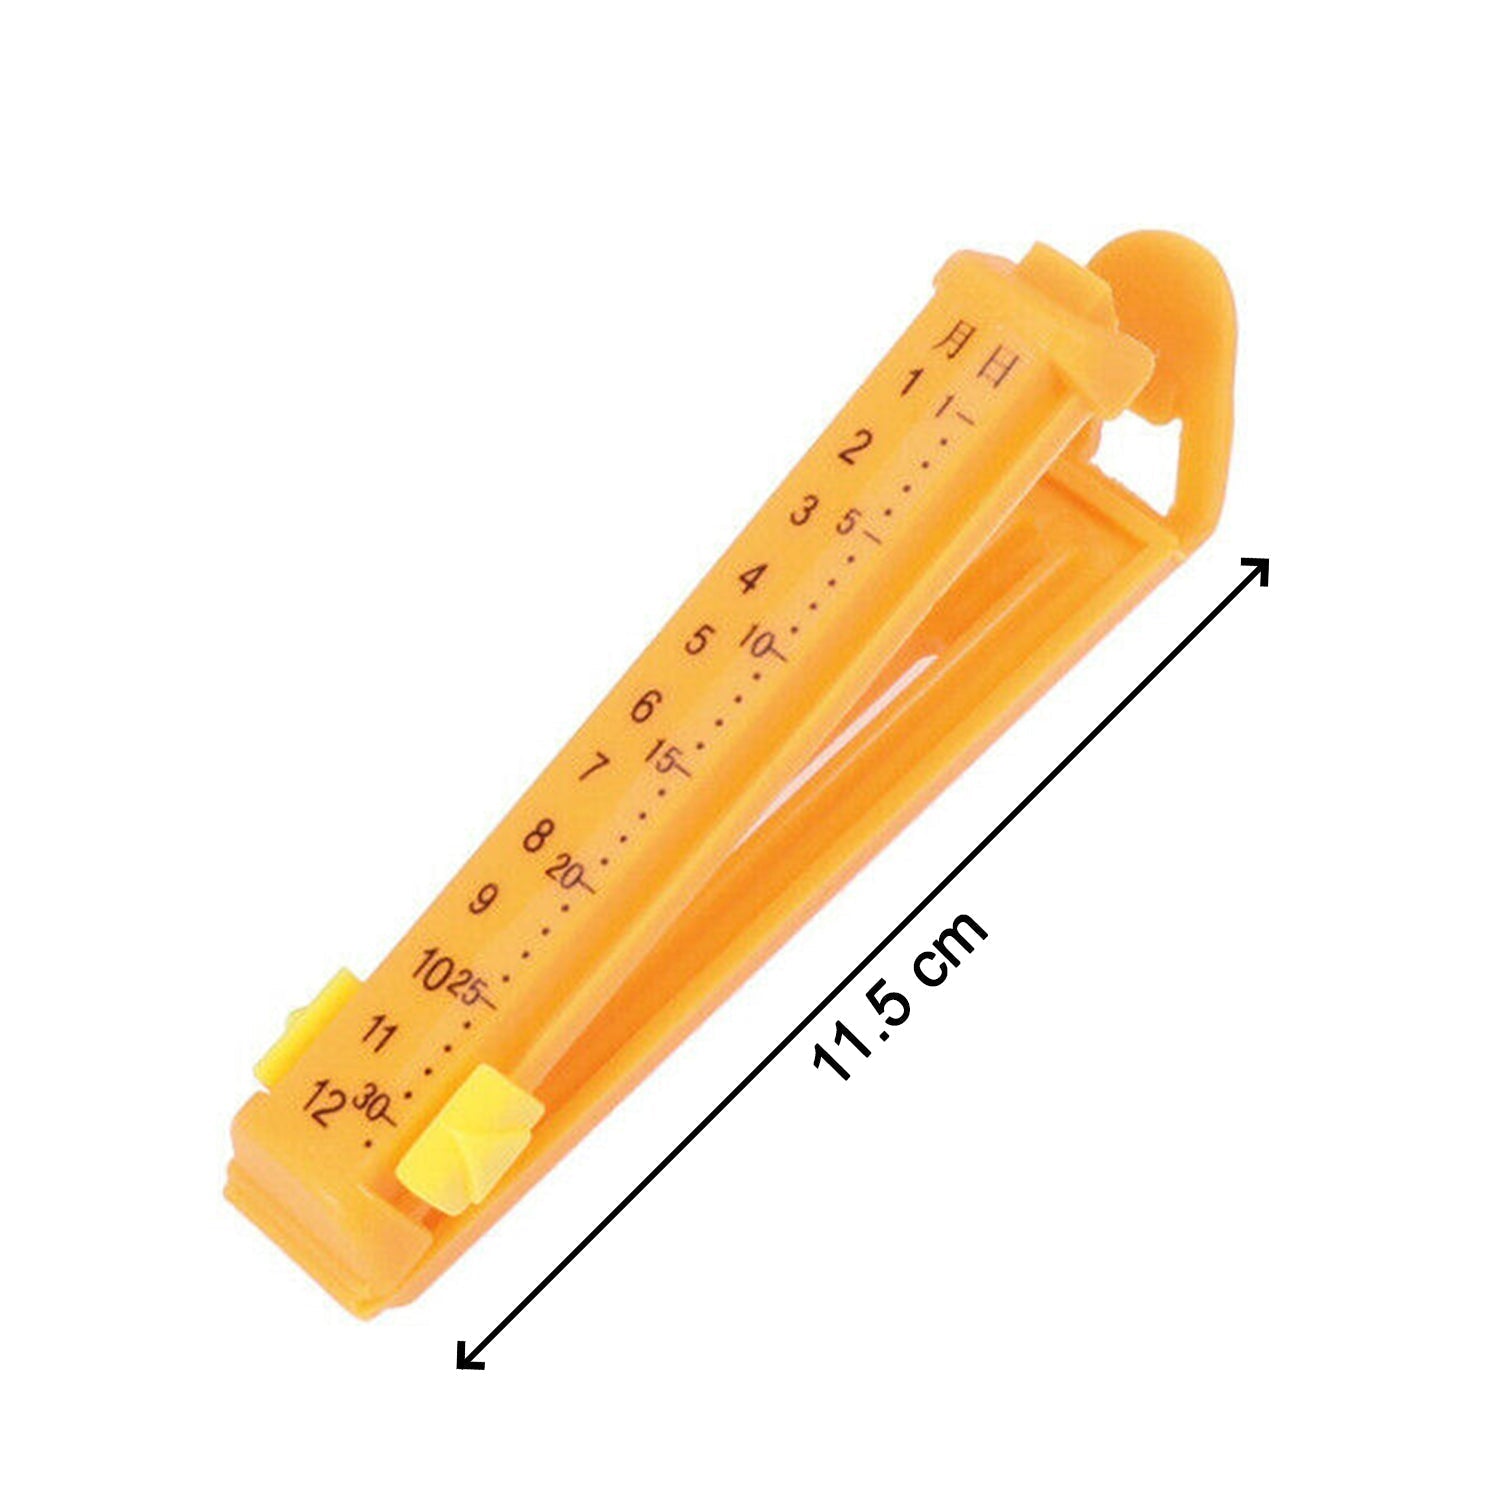 6309 4 Pc Food Sealing Clip used for sealing of packed food stuffs and items to prevent them from contamination.